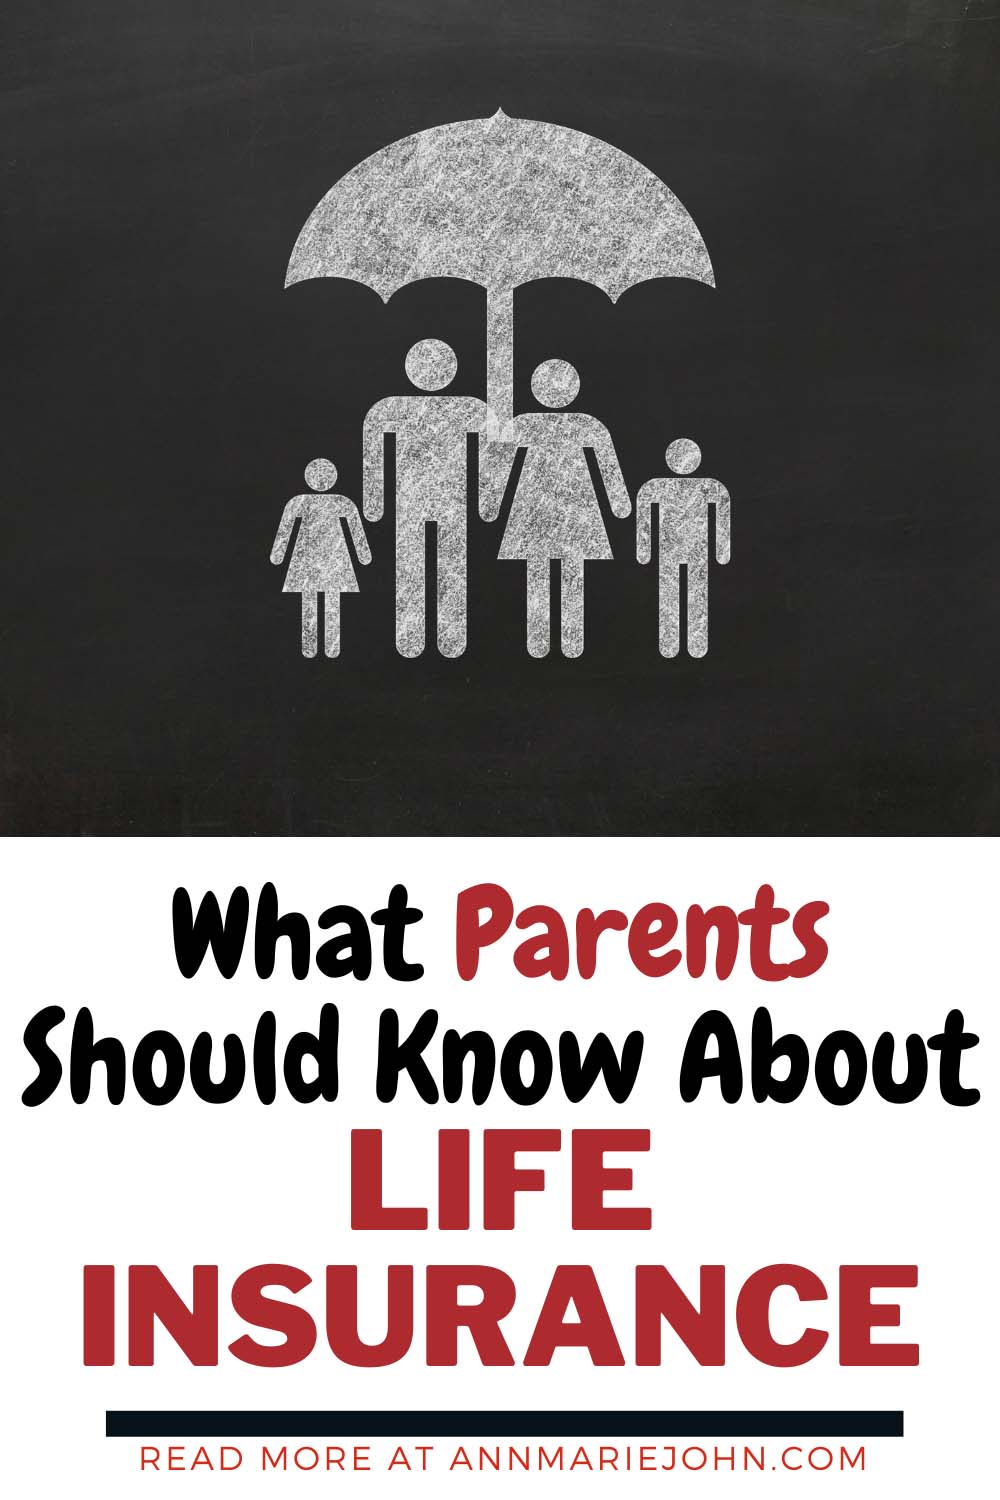 What Parents Should Know About Life Insurance